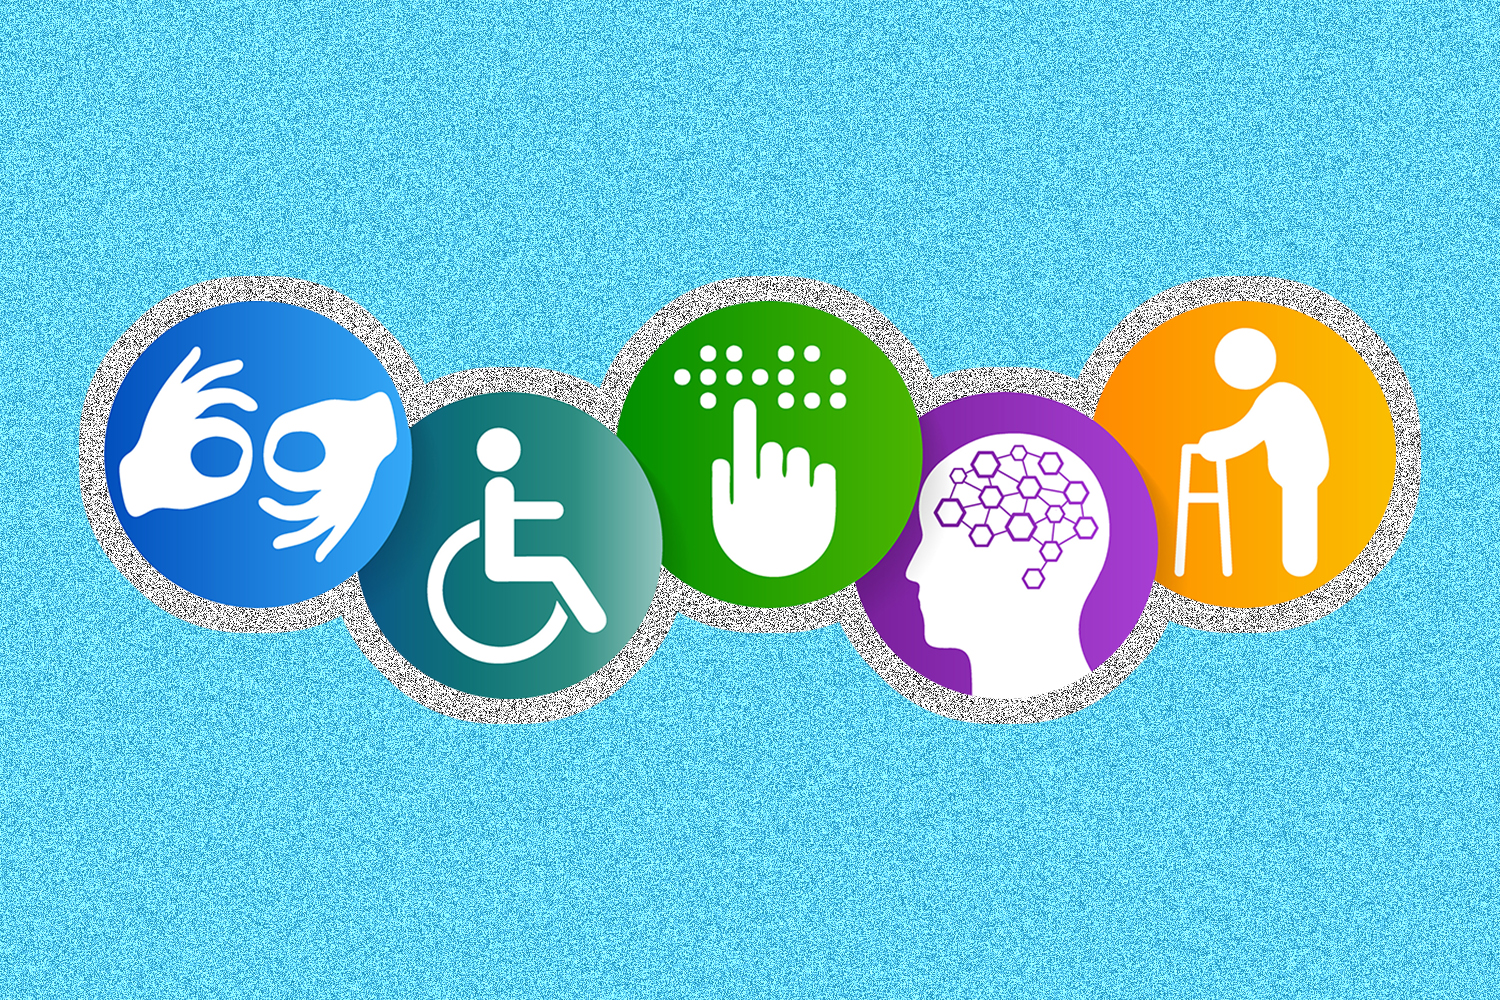 Icons representing physical and neurological disabilities.